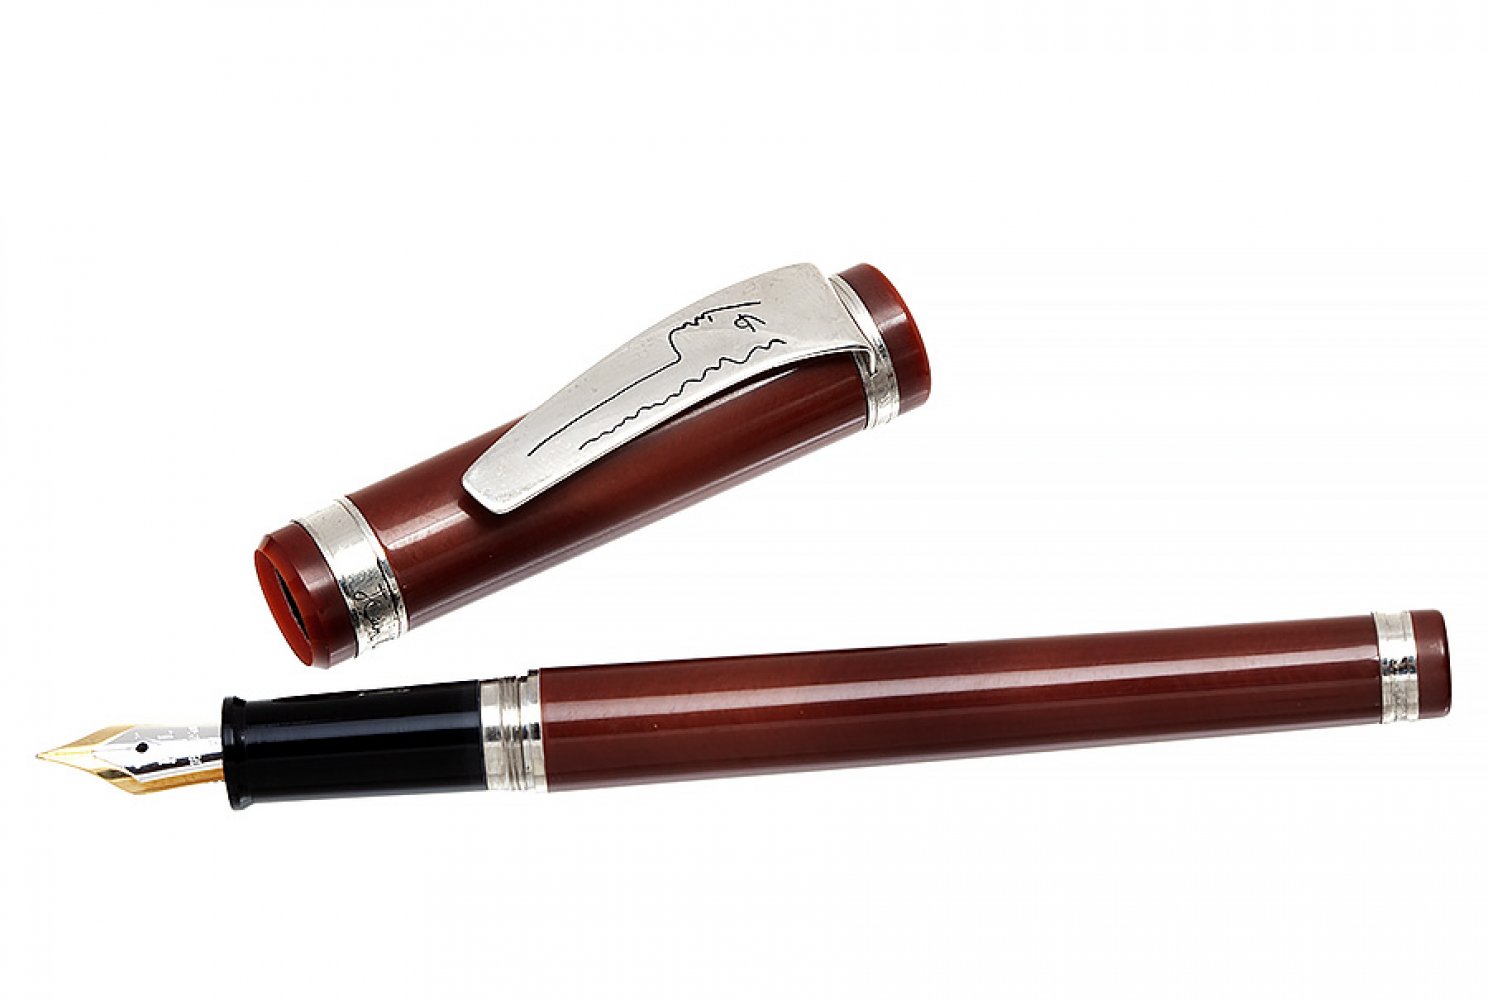 FRANCOIS-YVES LUTHIER "JEAN COCTEAU" FOUNTAIN PEN.Brown galatite barrel and silver plated - Image 2 of 2